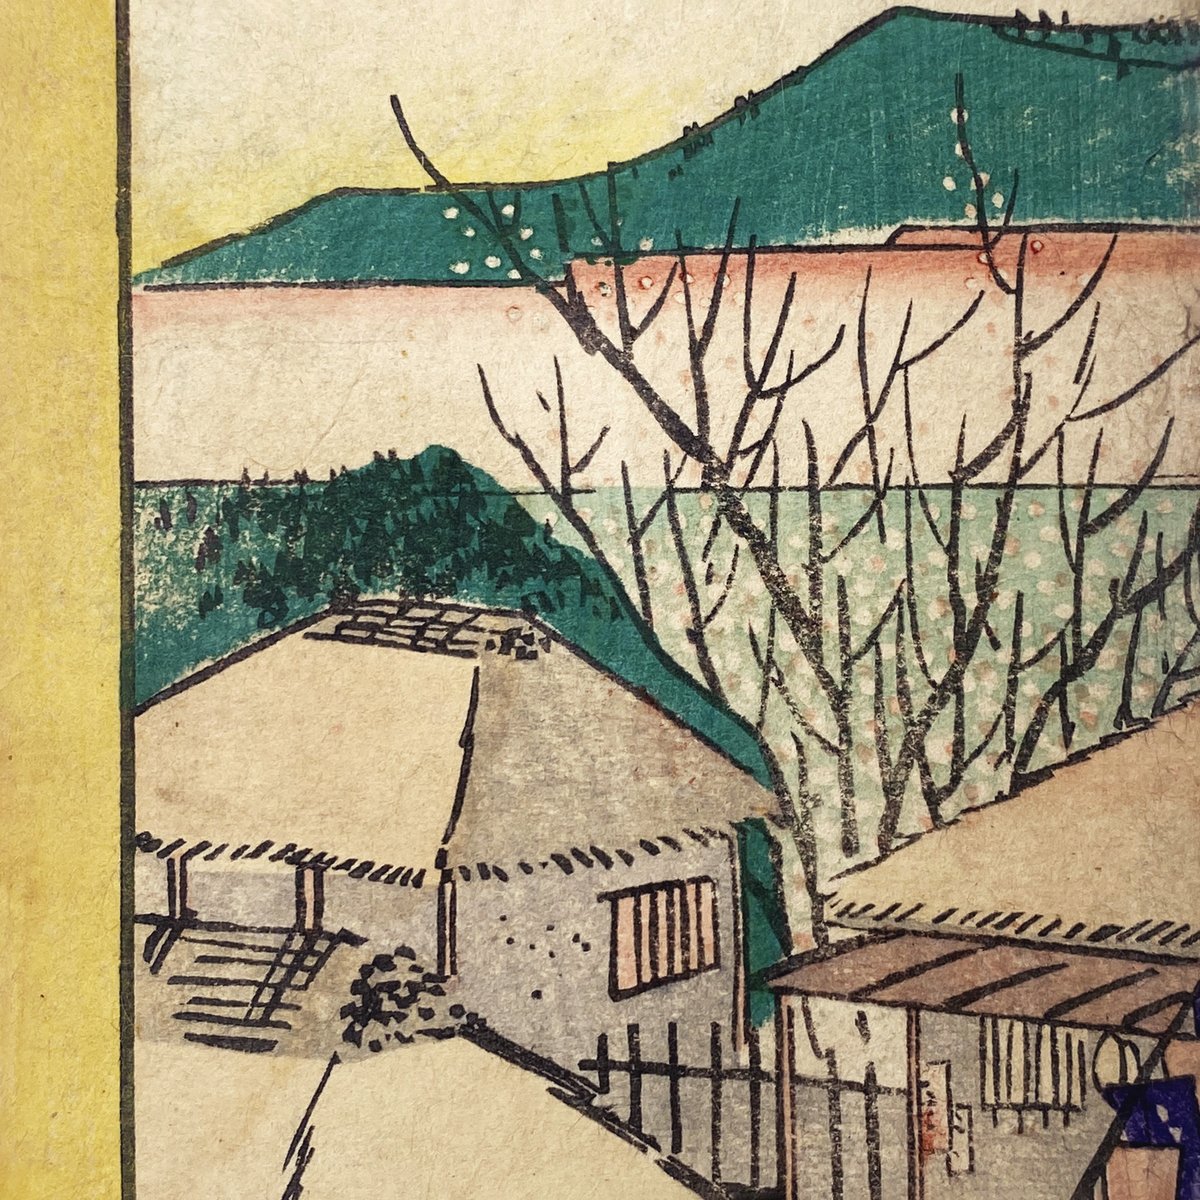 ✨🖌️ Festive Special Offer! ✨🖌️ Get 20% off marketed items when you buy one of the original Japanese woodblock prints from Japanese Gallery available at the Museum Shop. Treat yourself to a piece of affordable history! #Museums #Discounts #BathVisit #IndependentShop